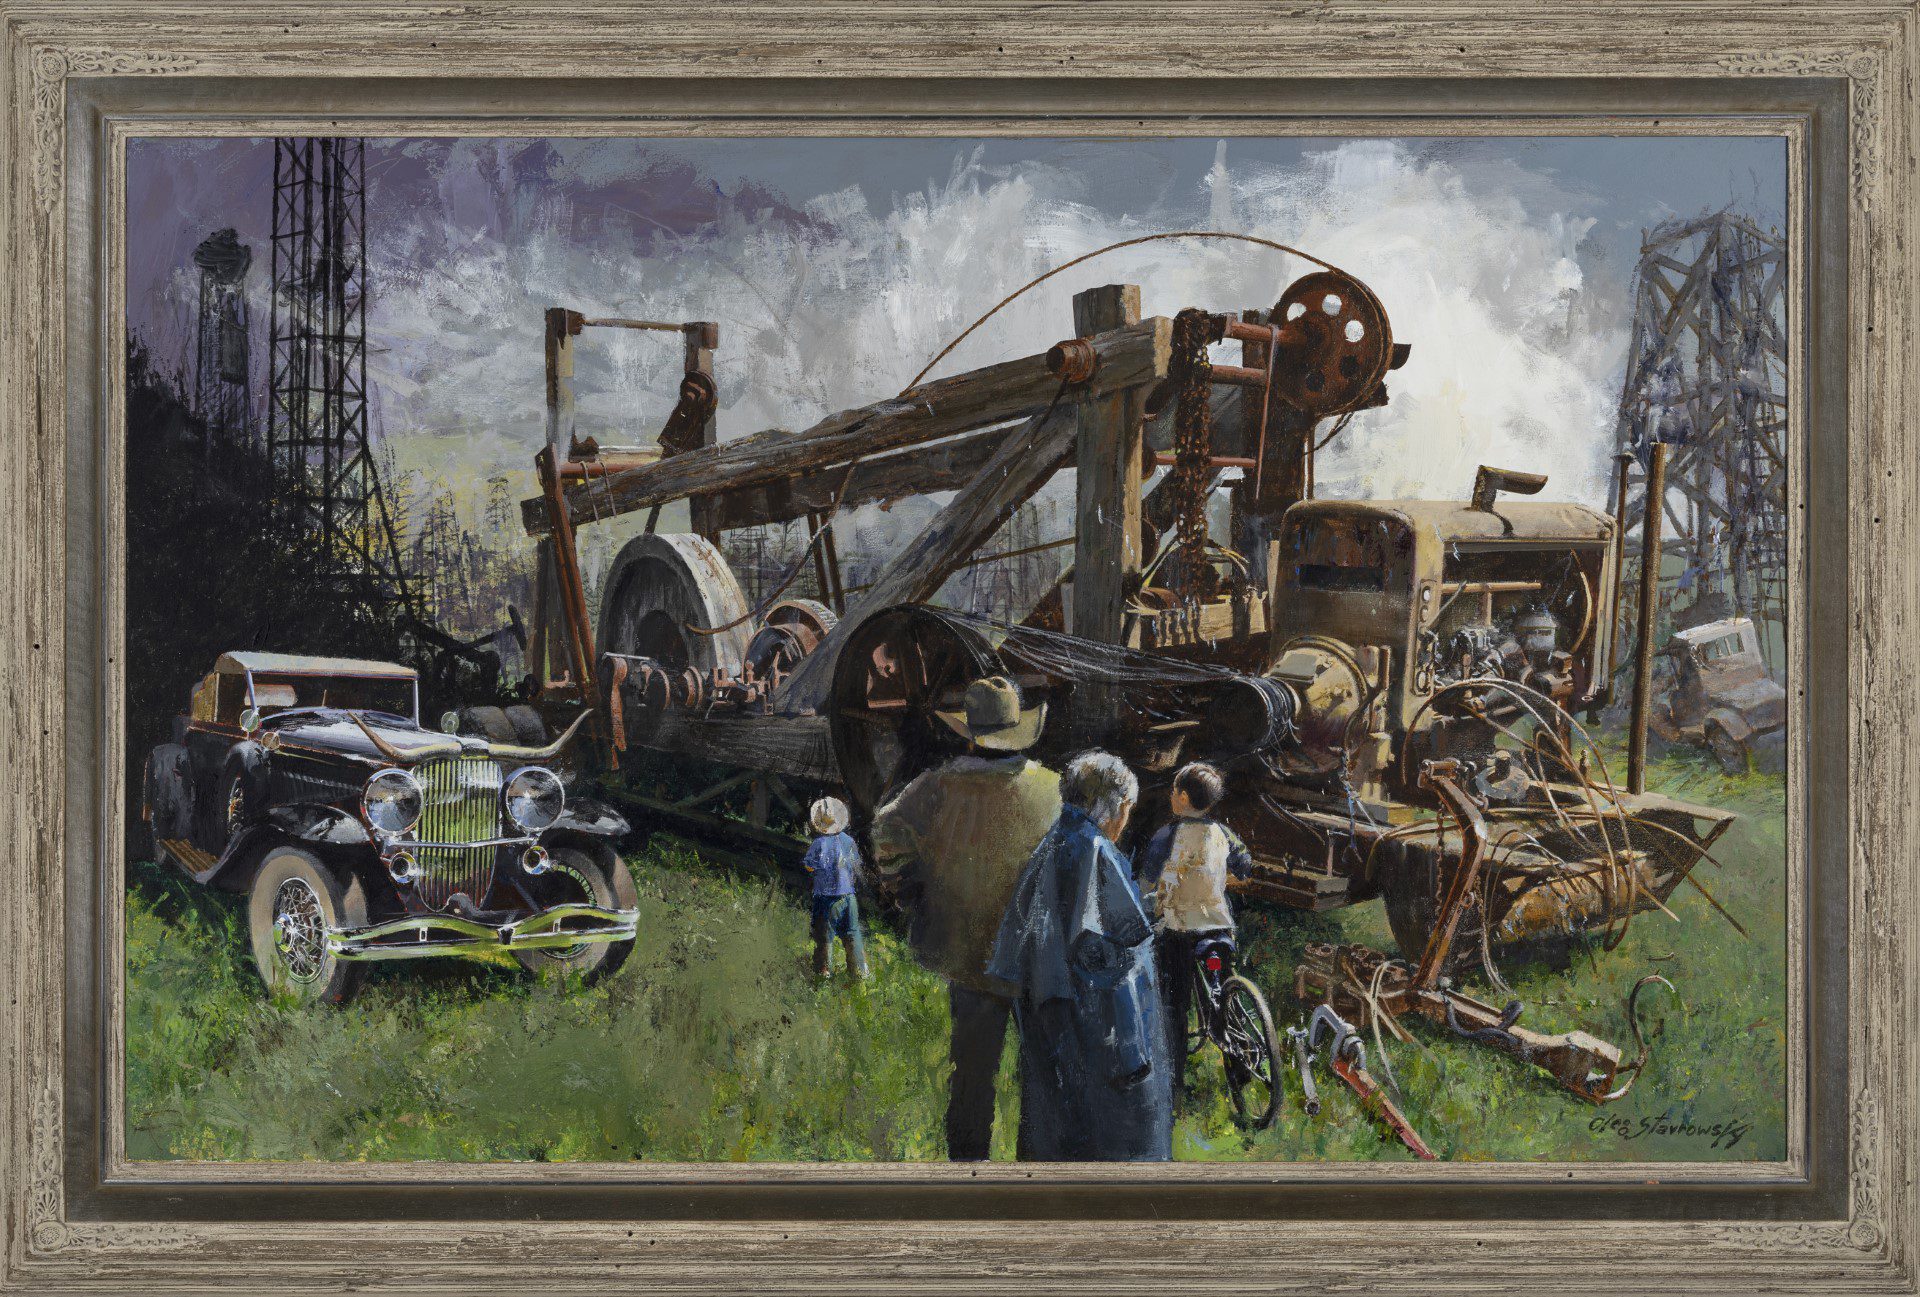 LARGE PAINTING FOR SALE - HISTORIC OIL FIELD SCENE